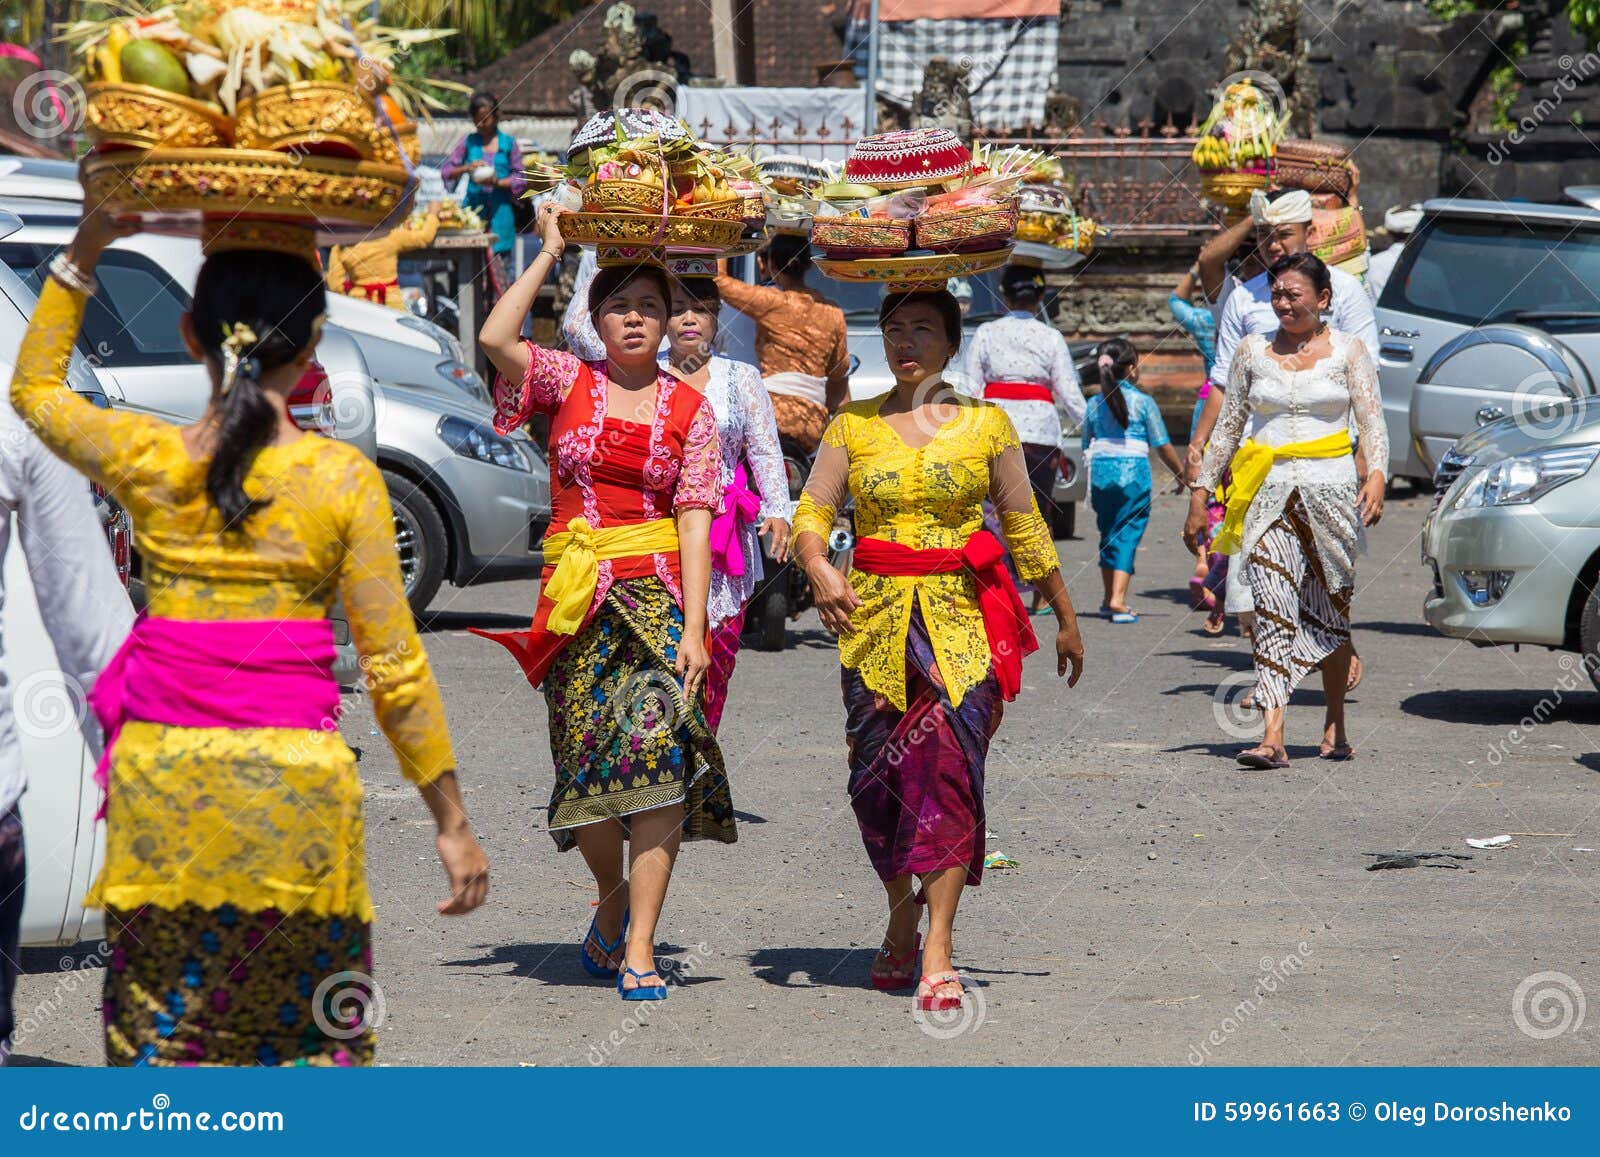  Indonesian  People  Celebrate Balinese New Year And The 